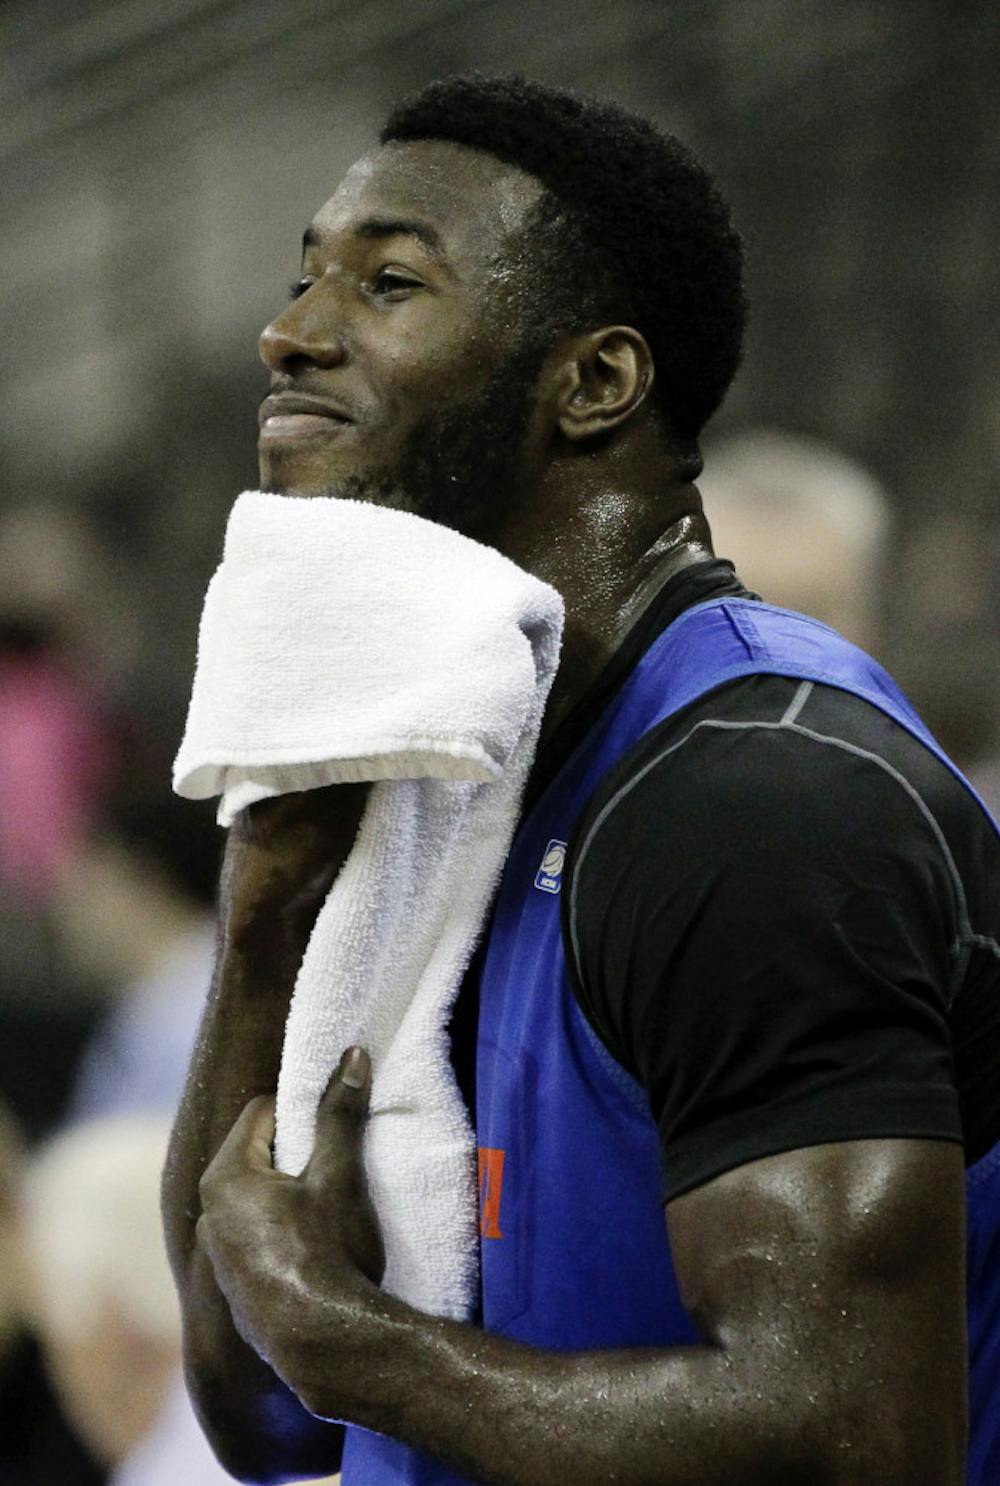 <p>Florida center Patric Young towels off during a practice last week in Omaha, Neb. Young and Marquette forward Jae Crowder have gone back and forth in the media this week ahead of their Sweet 16 meeting tonight in Phoenix.</p>